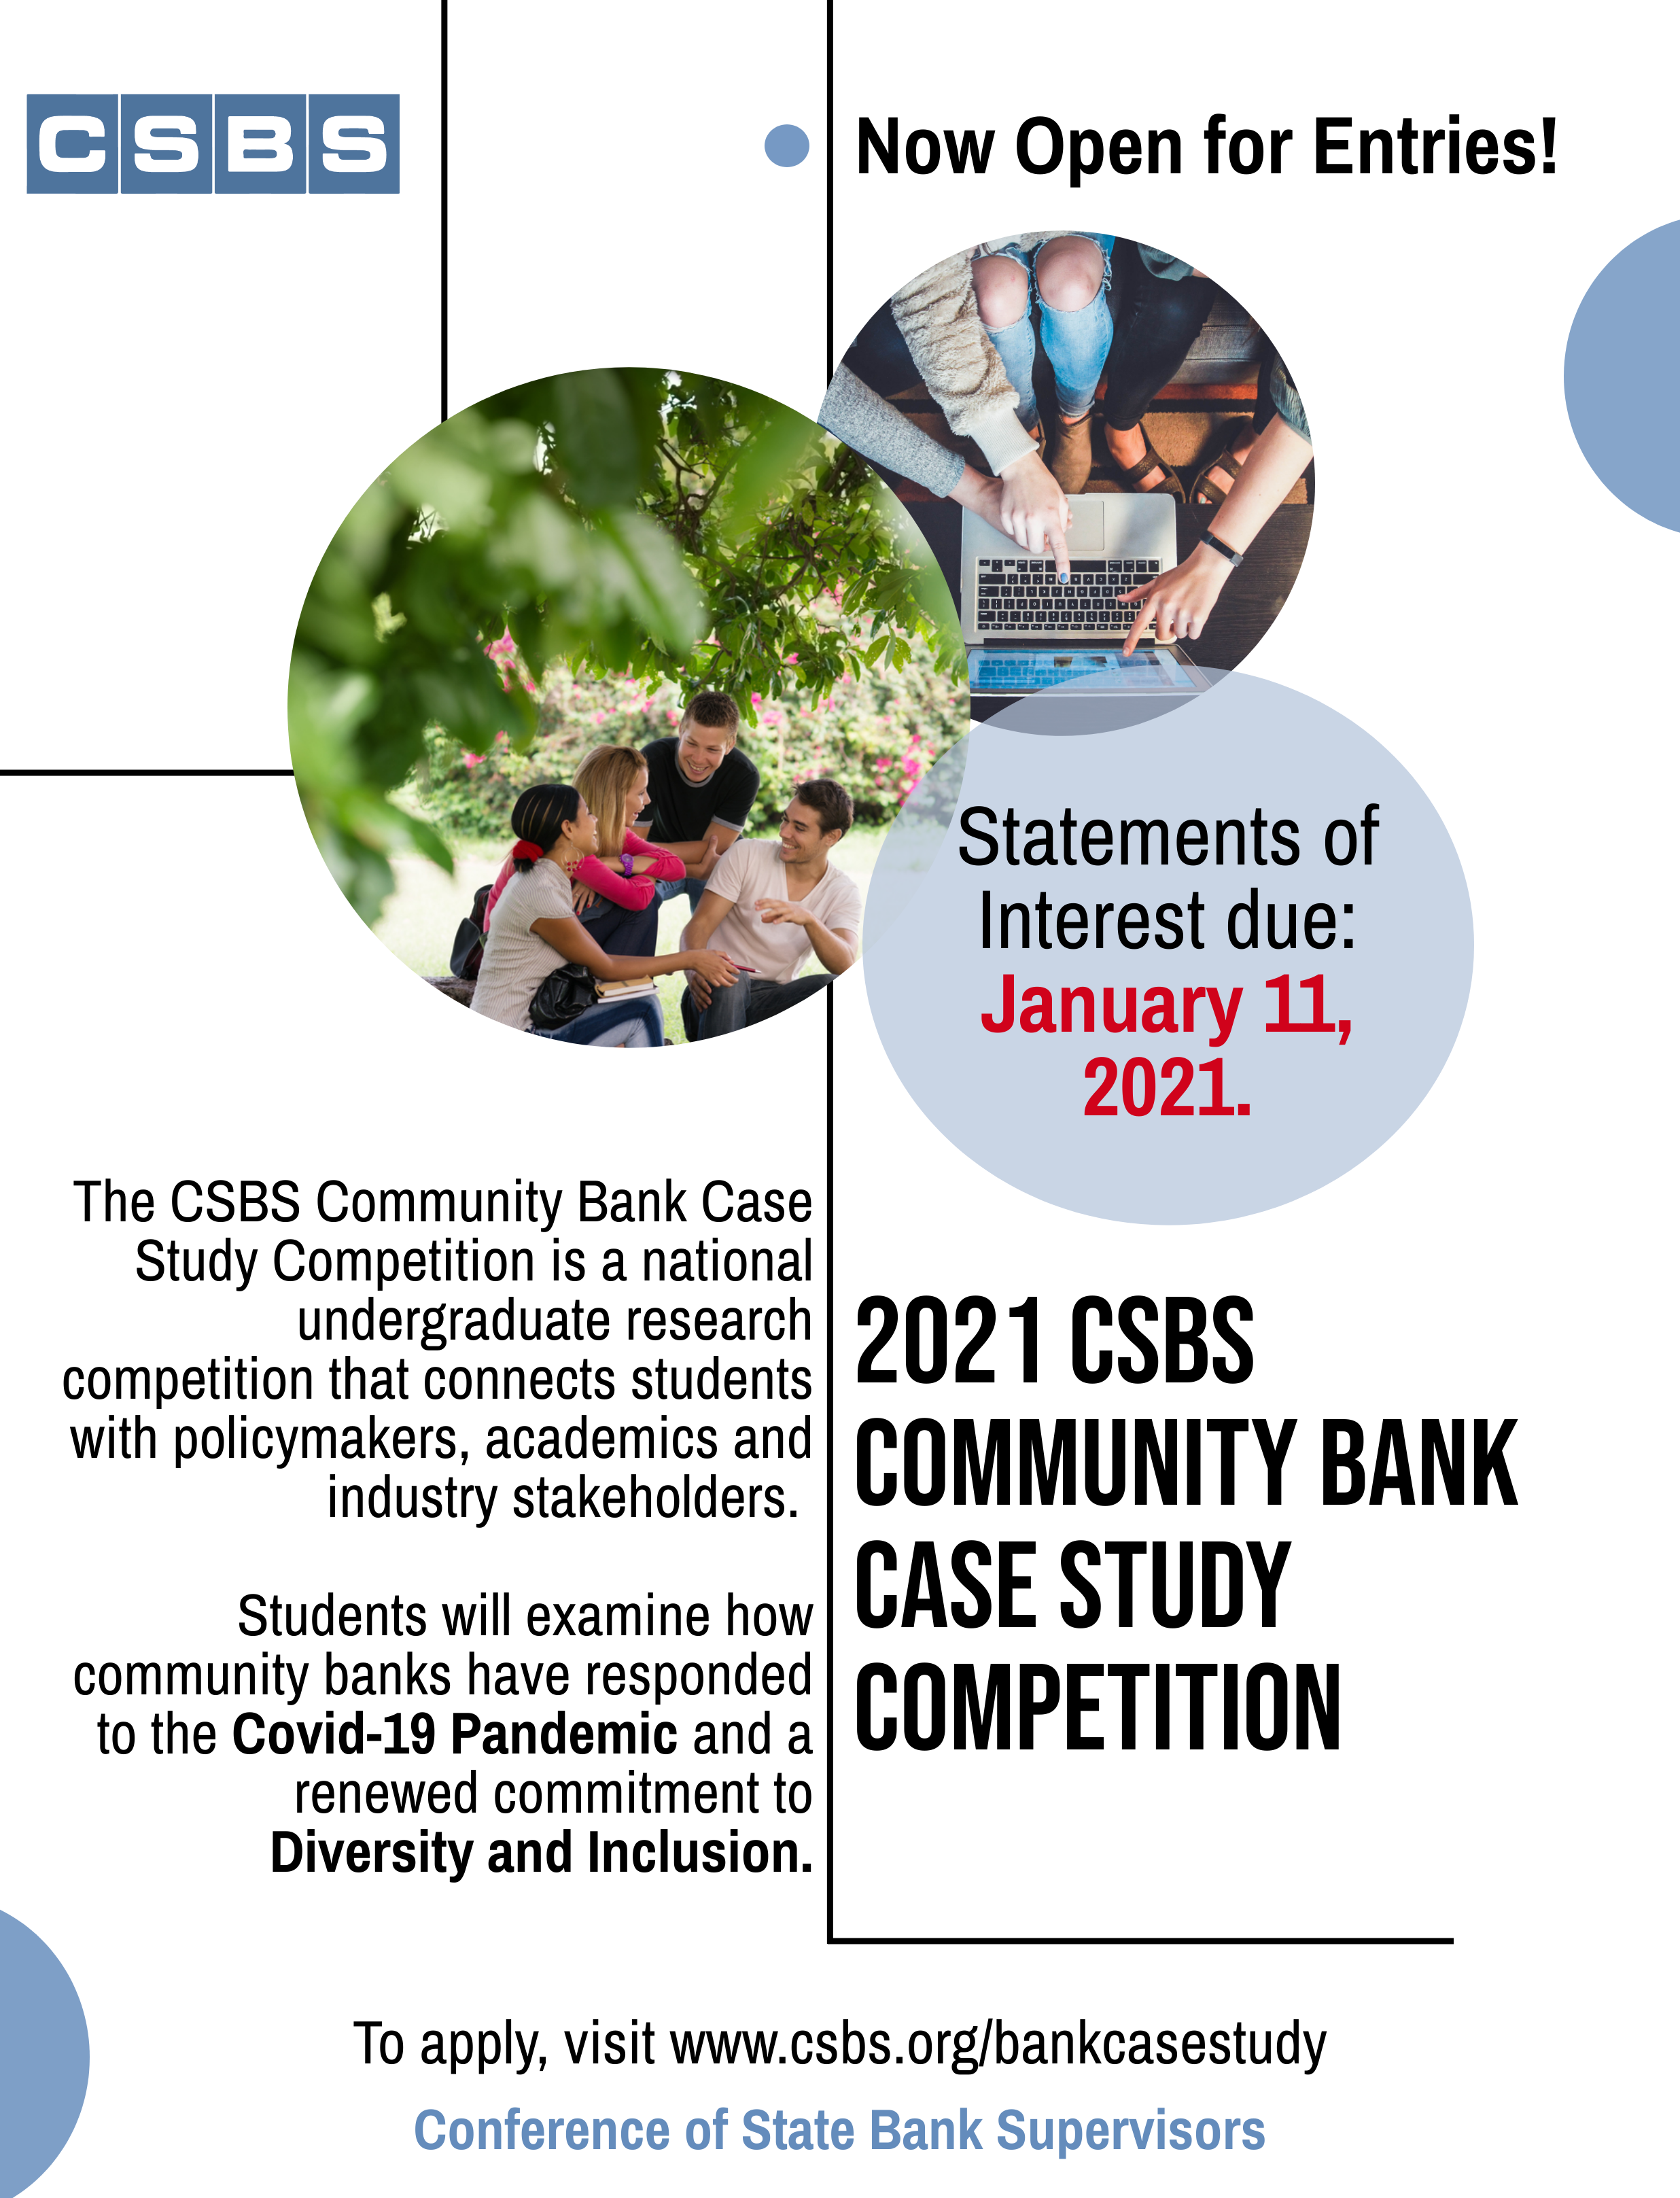 community bank case study competition